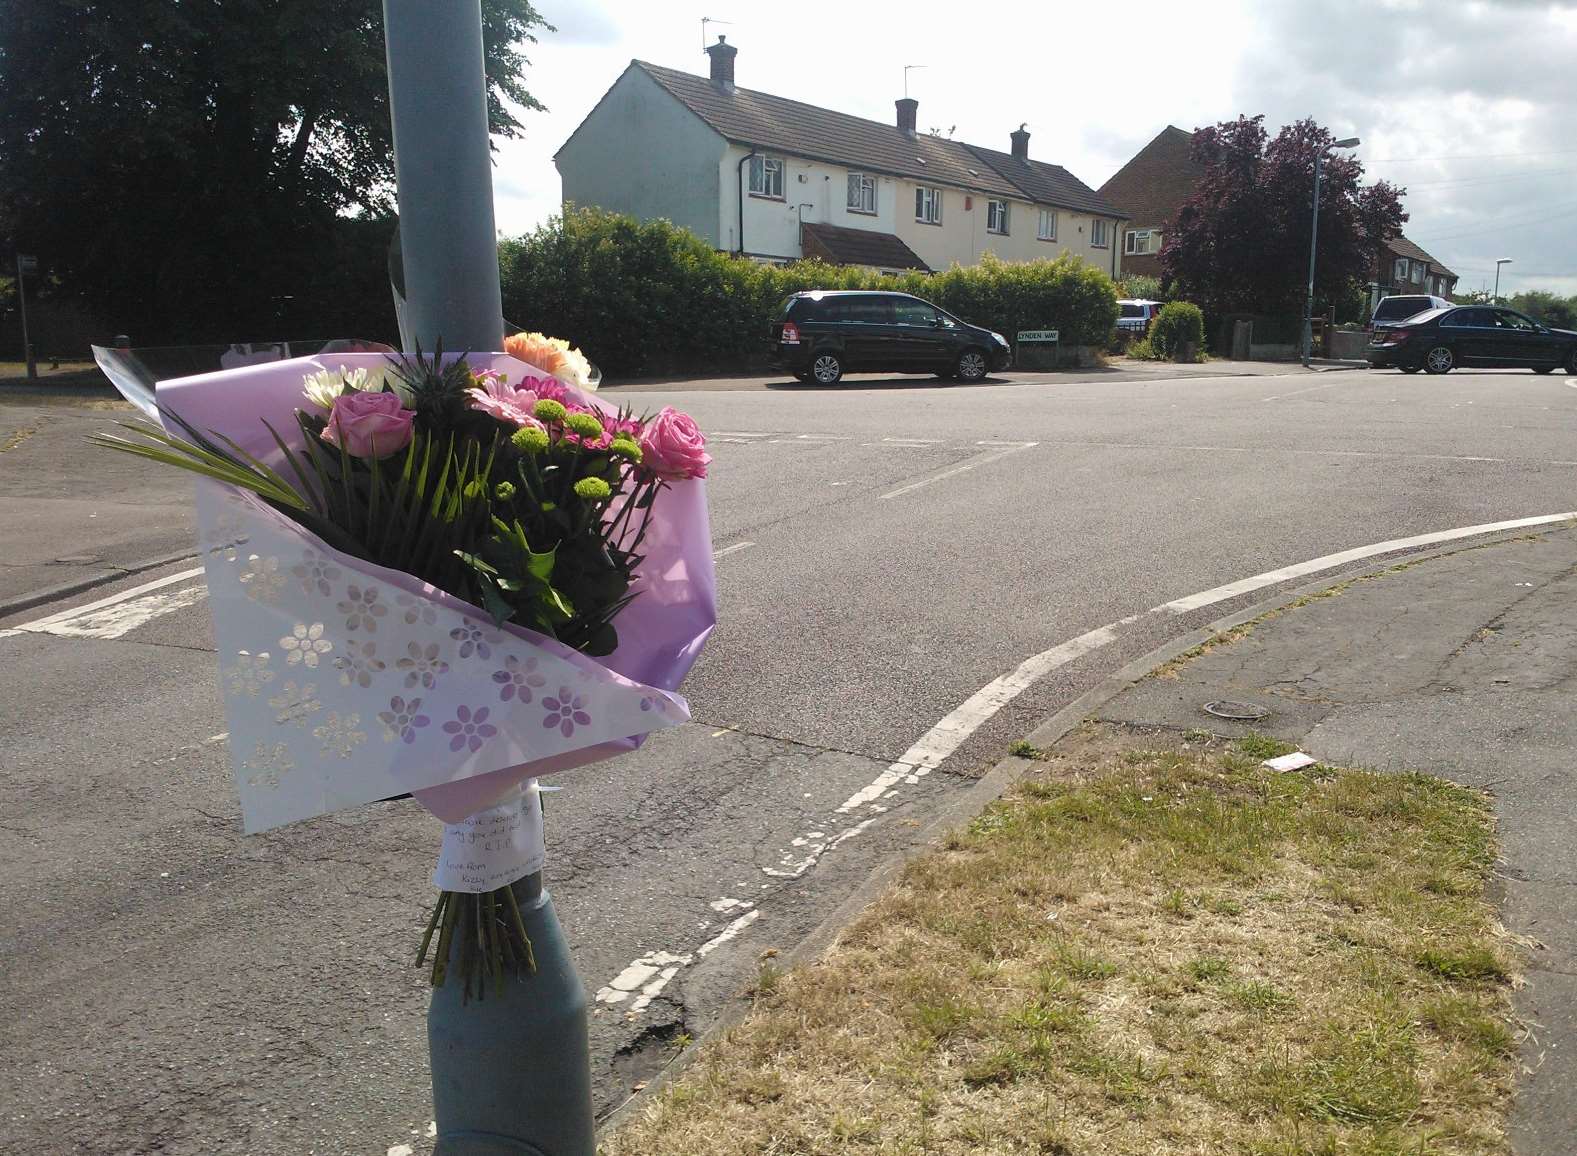 The scene of the tragedy in Lynden Way, Swanley